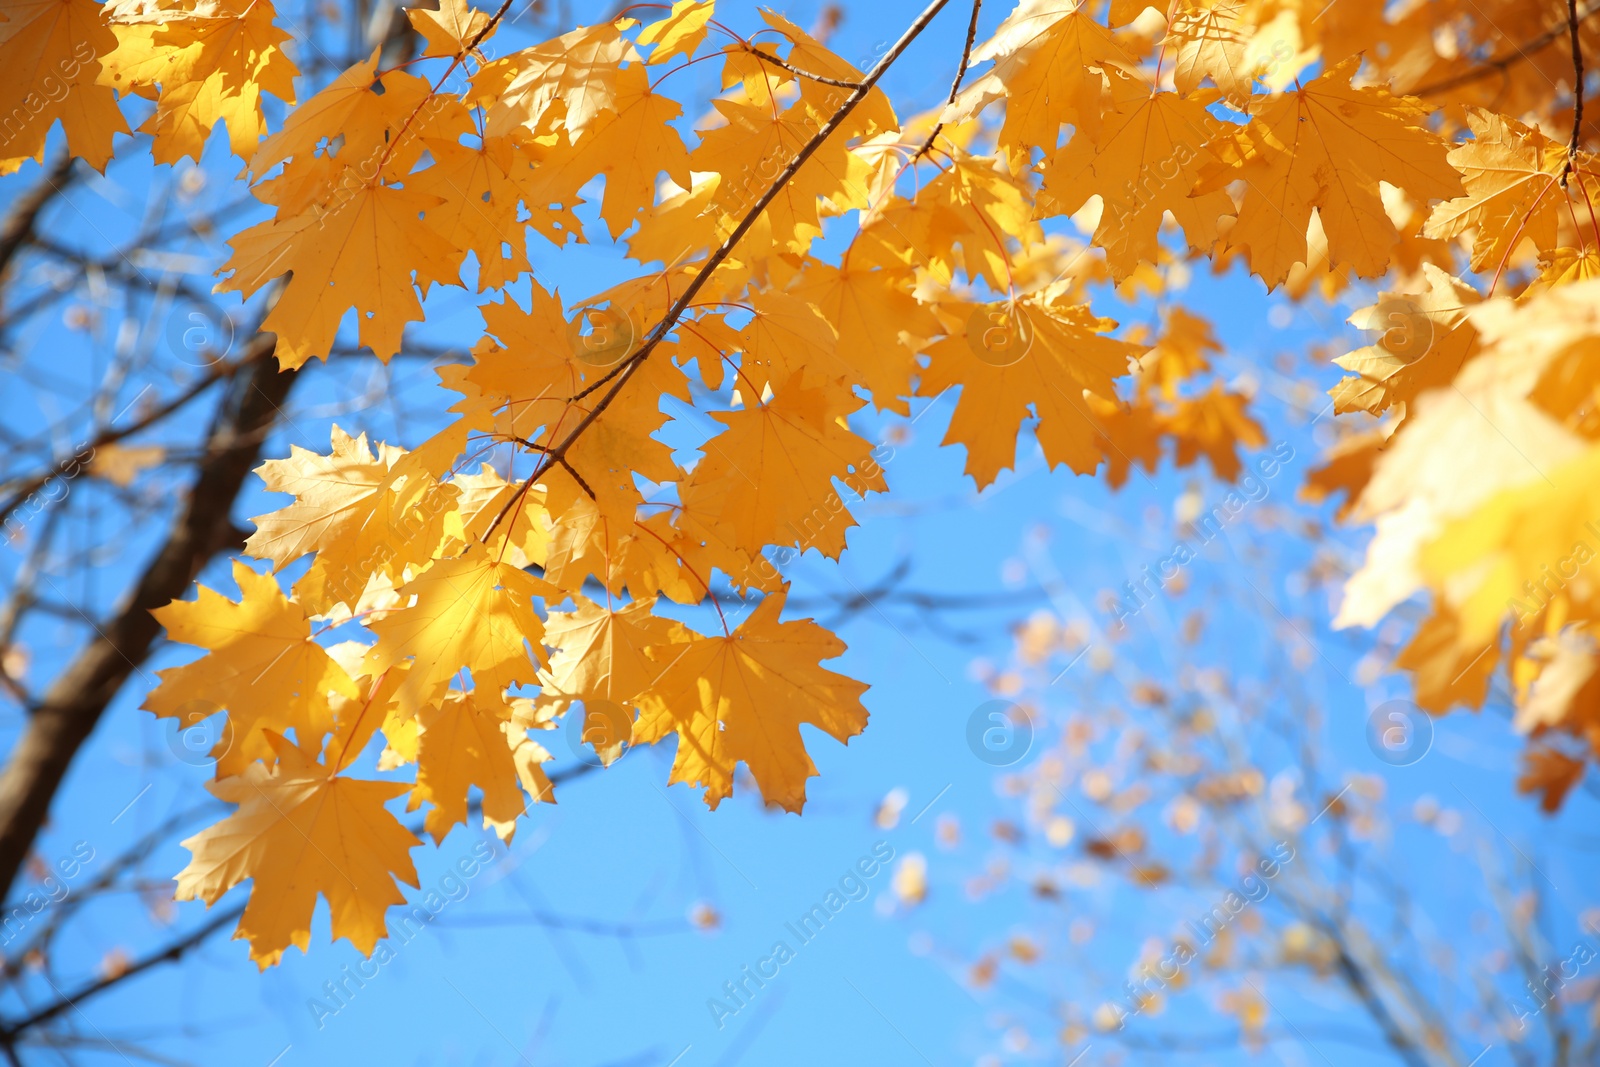 Photo of Branches with autumn leaves against blue sky on sunny day